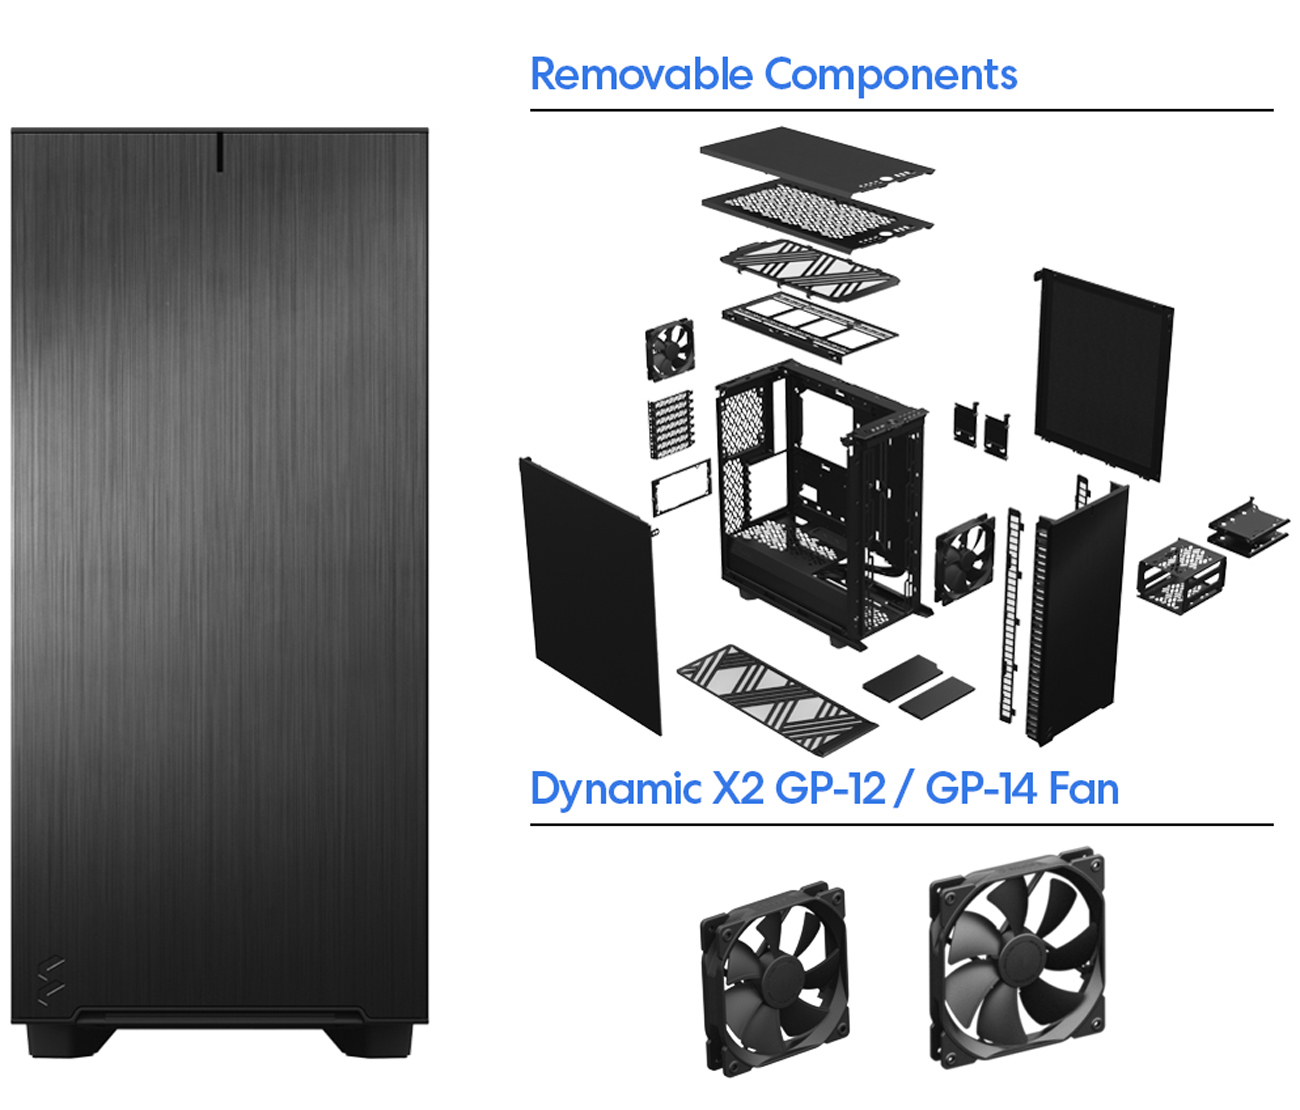 Removable Components